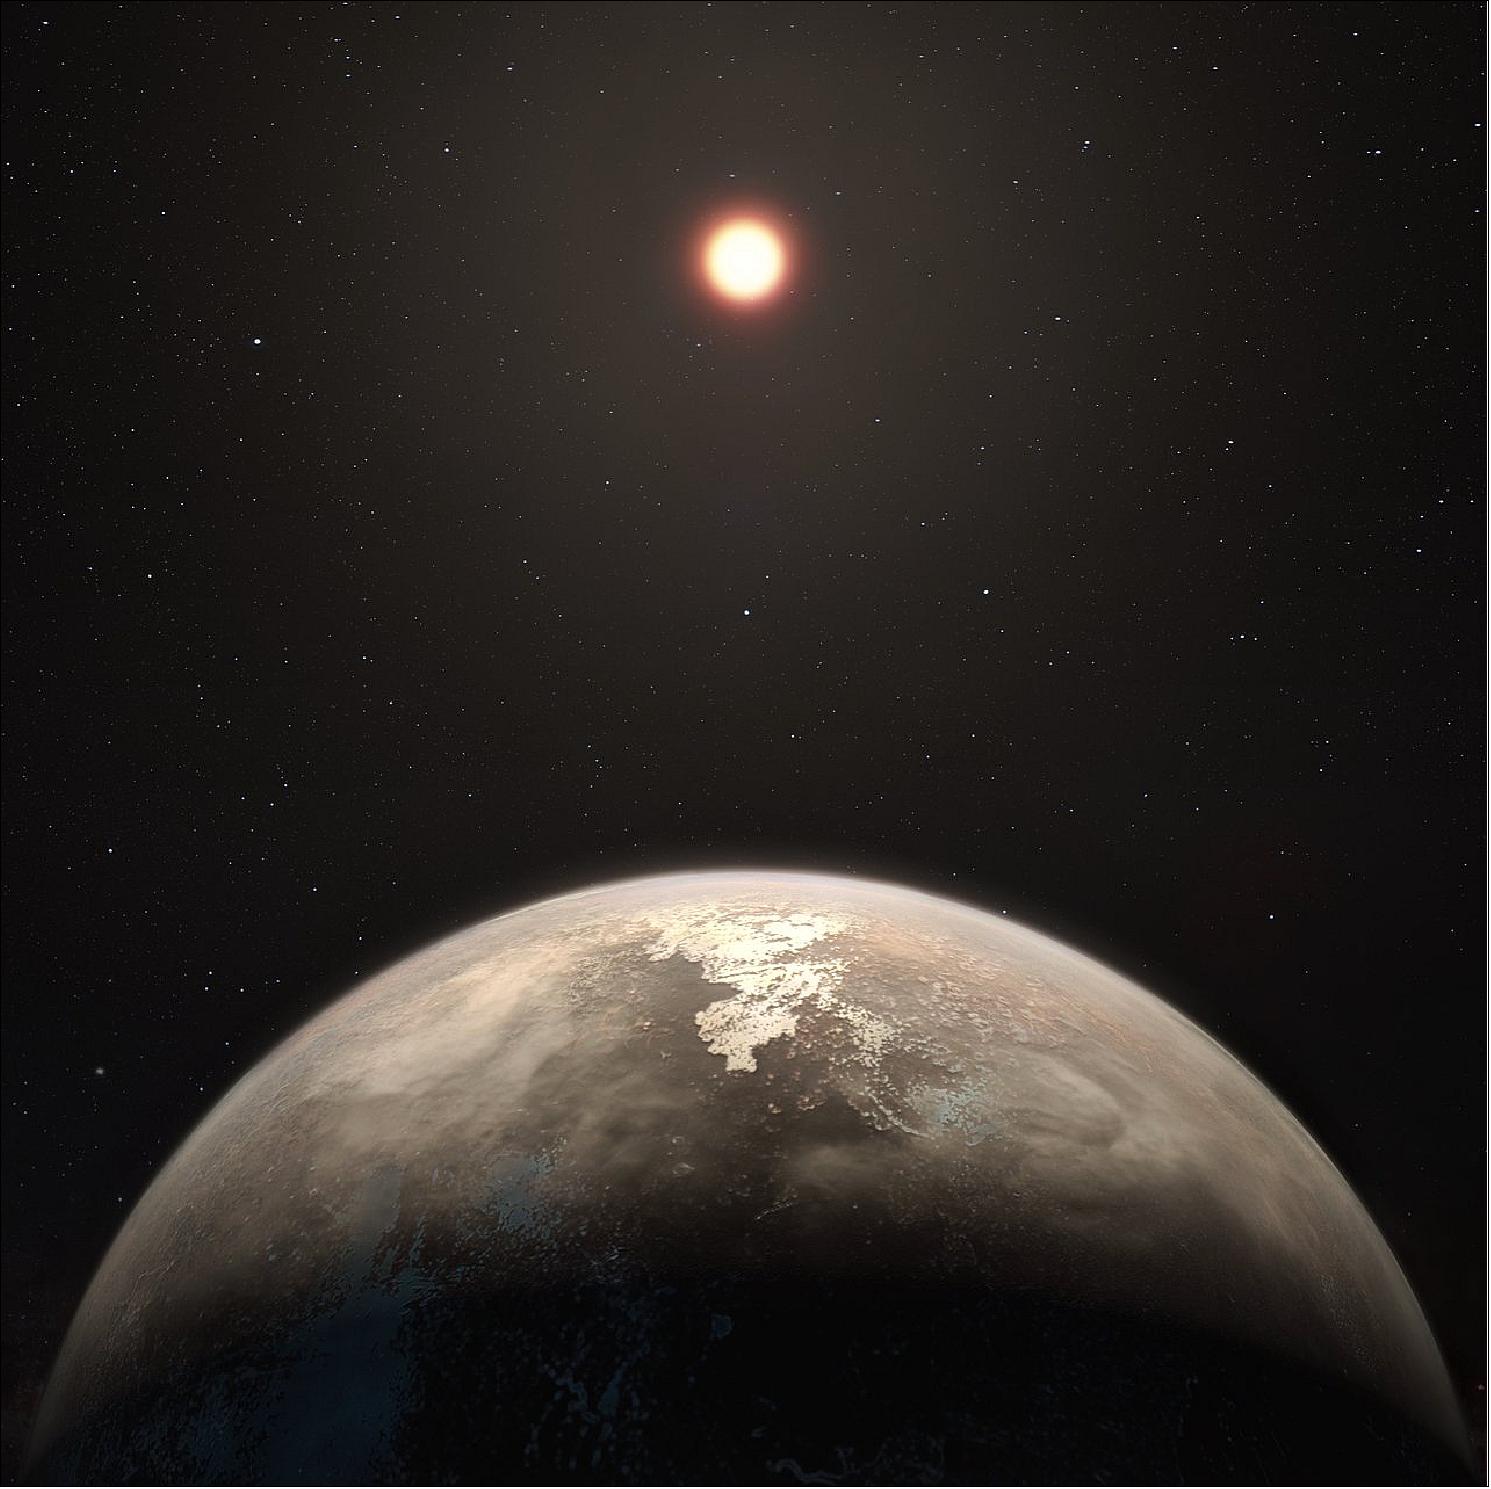 Figure 15: Artist’s impression of the planet Ross 128 b, a Milky Way star. A temperate Earth-sized planet has been discovered only 11 light-years from the Solar System by a team using ESO’s unique planet-hunting HARPS instrument. The new world has the designation Ross 128 b and is now the second-closest temperate planet to be detected after Proxima b. It is also the closest planet to be discovered orbiting an inactive red dwarf star, which may increase the likelihood that this planet could potentially sustain life. Ross 128 b will be a prime target for ESO’s Extremely Large Telescope, which will be able to search for biomarkers in the planet's atmosphere (image credit: ESO/M. Kornmesser)